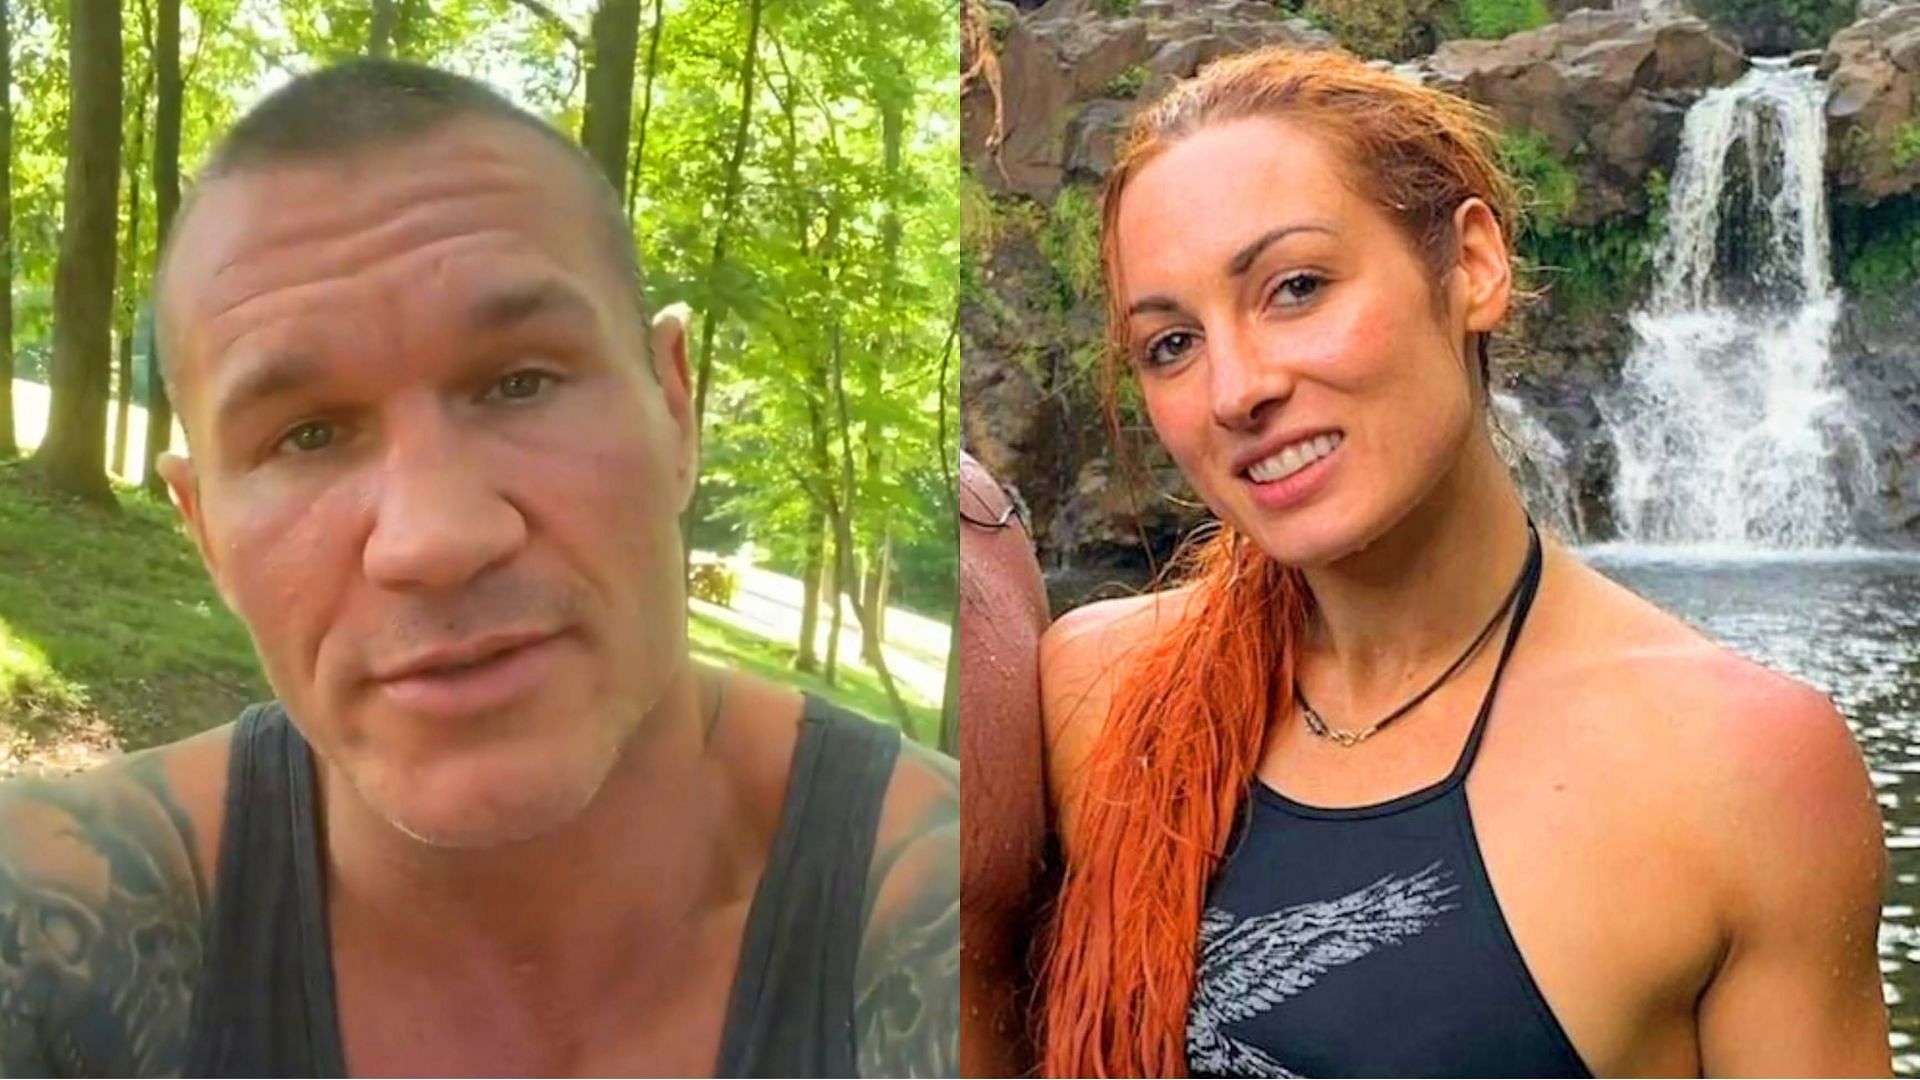 Randy Orton (left) and Becky Lynch (right)